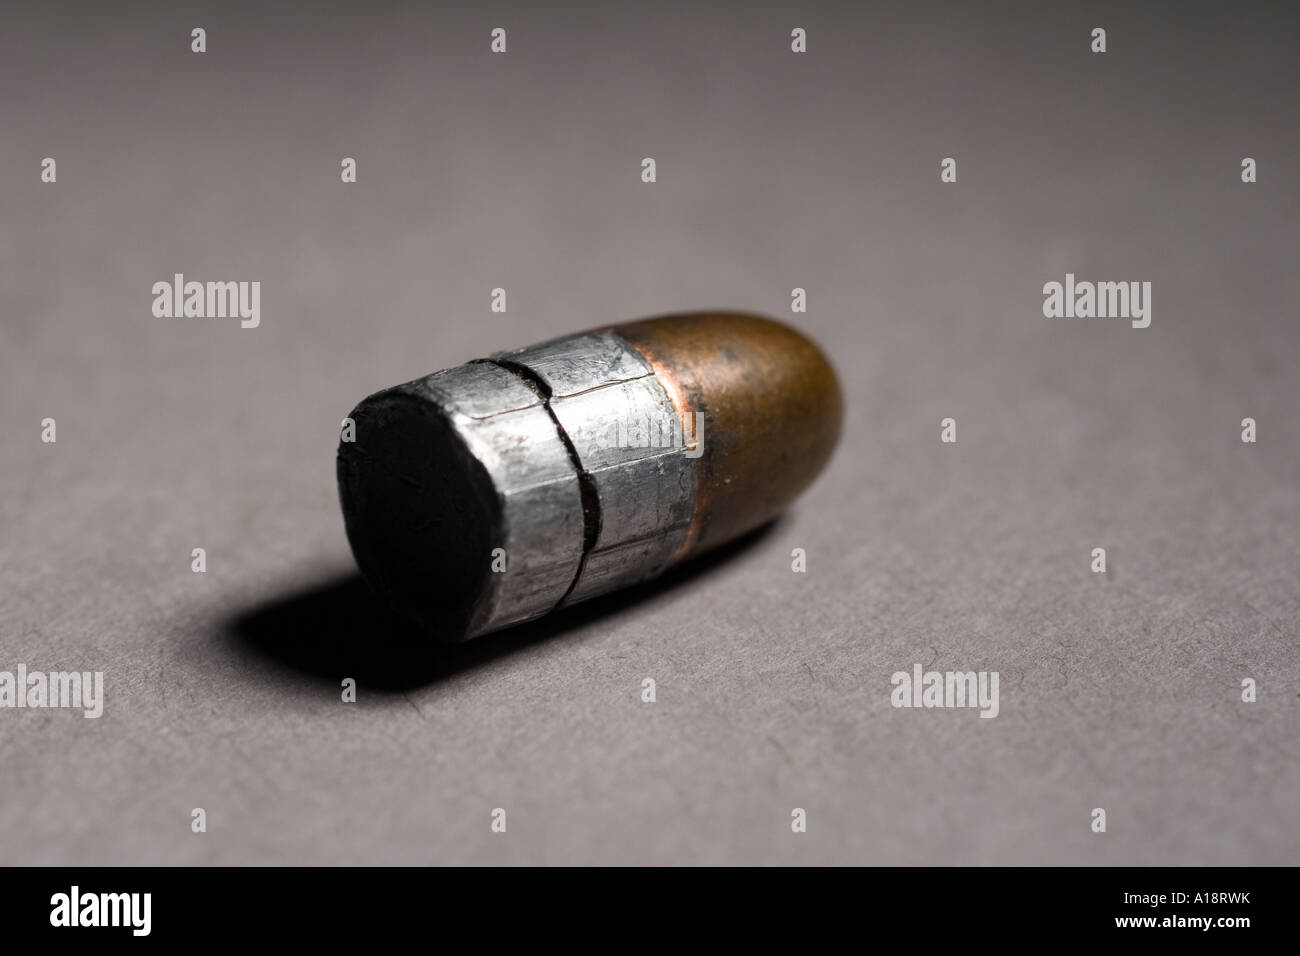 Forensics Ballistics Rifling marks on bullet also known as land impressions and groove impressions Stock Photo